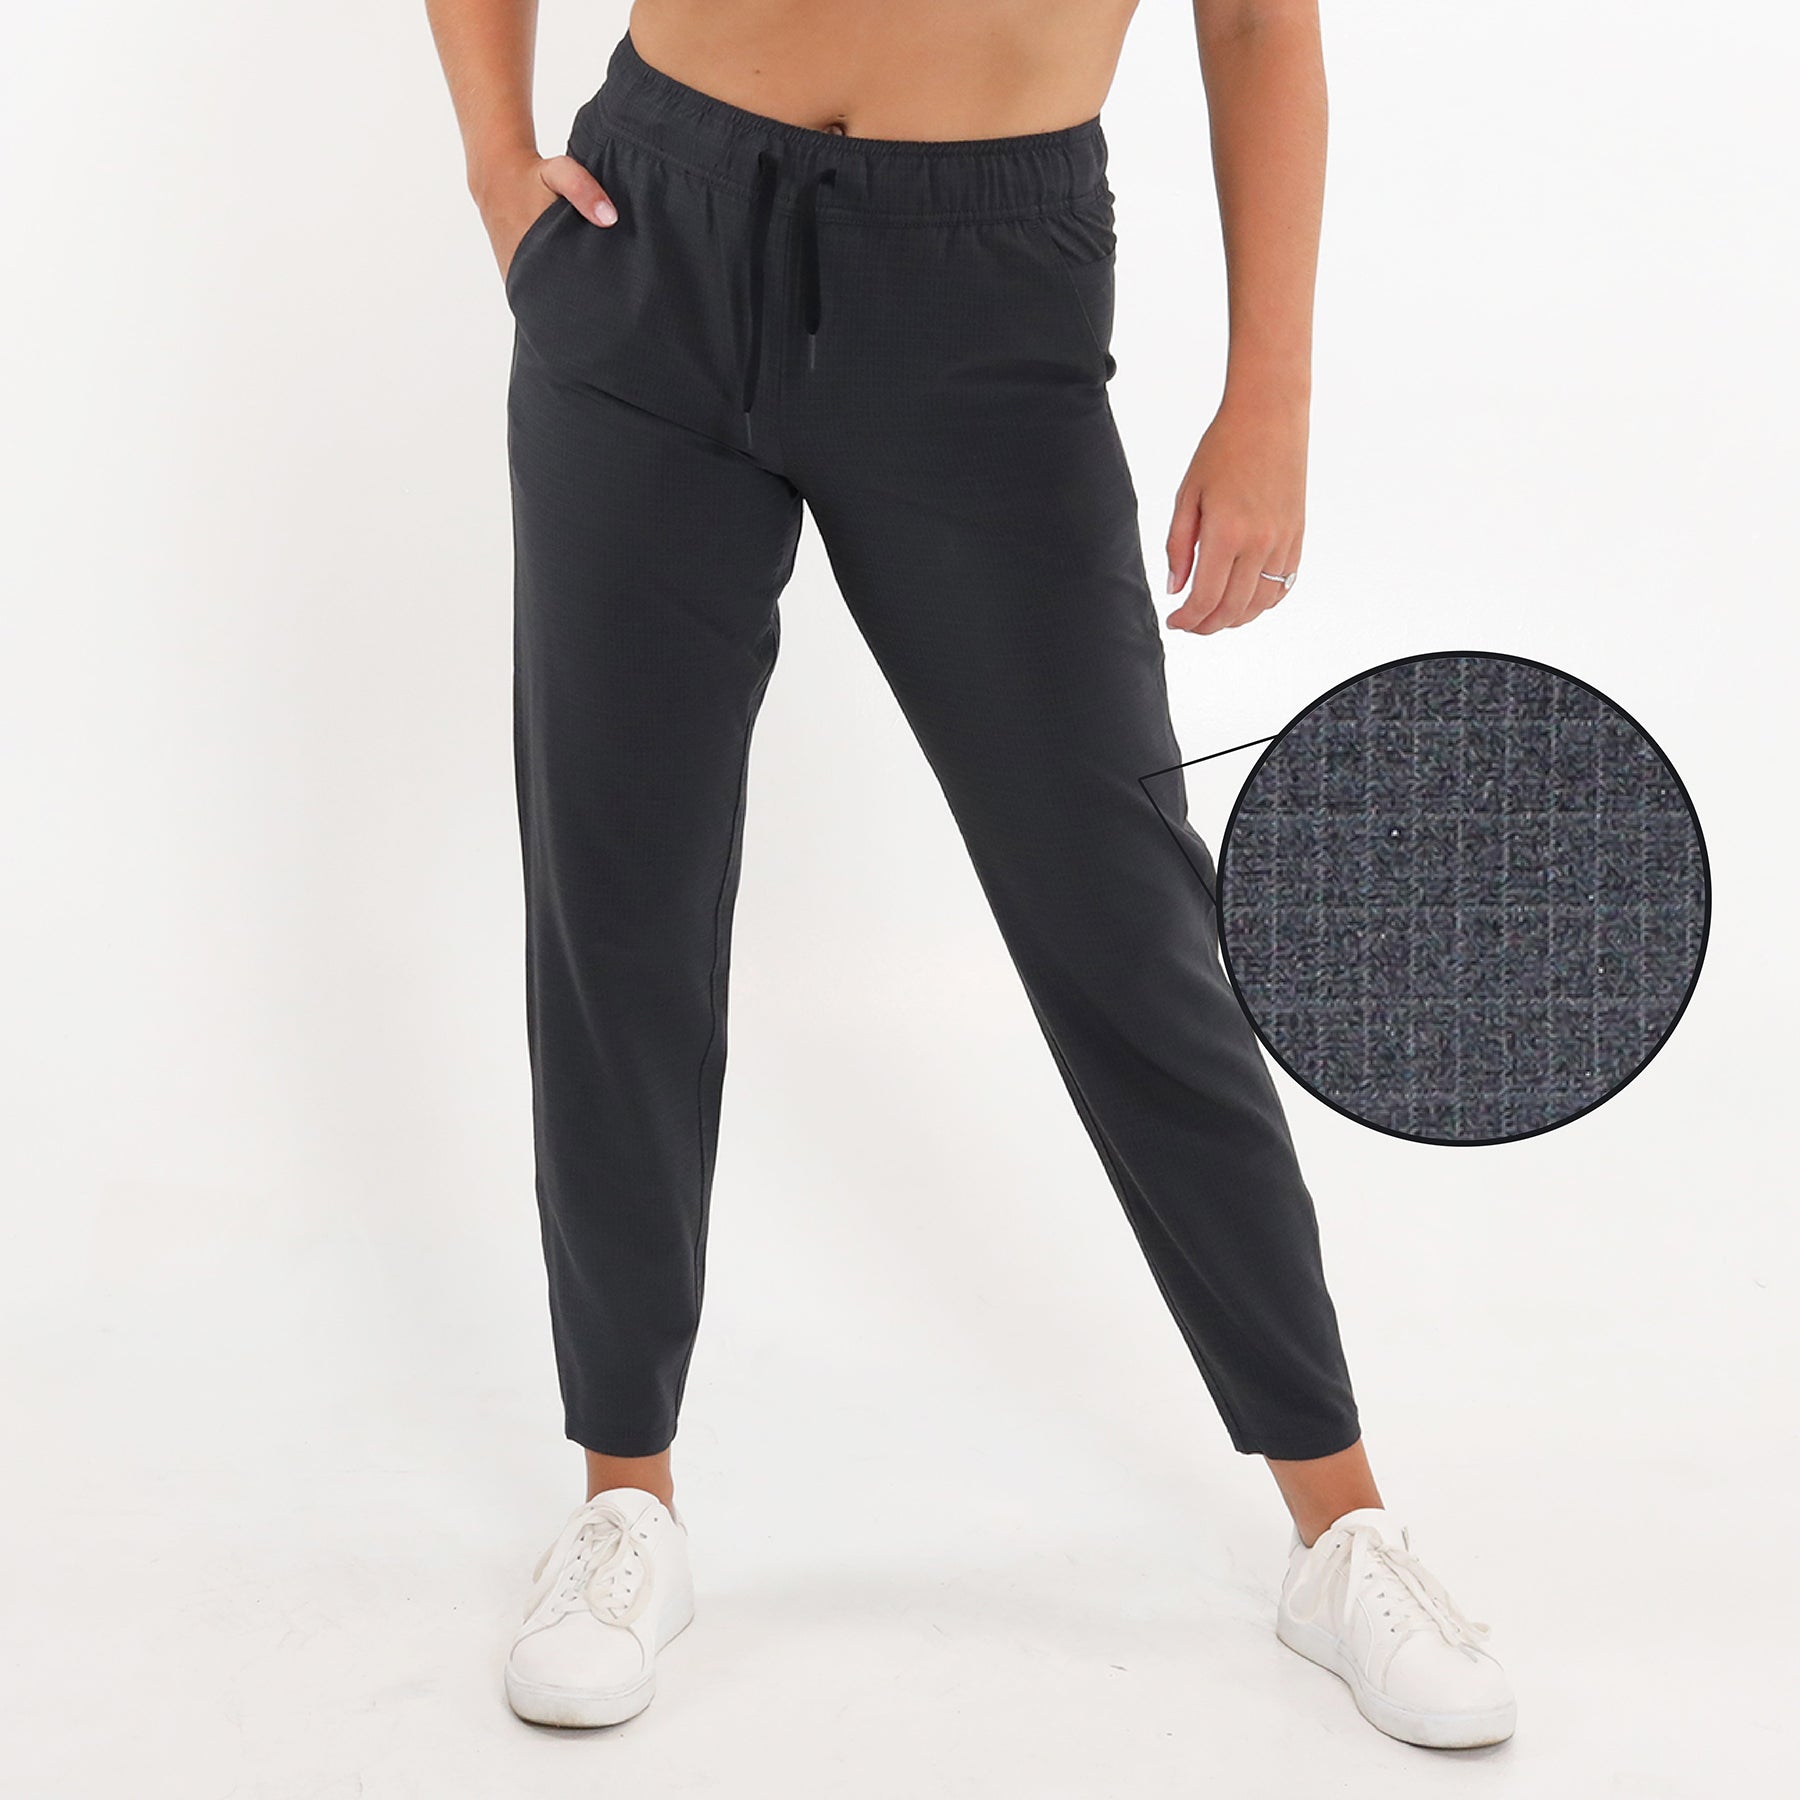 LADIES SOLUTION JOGGER - BLACK HEATHER – AndersonOrd Performance Apparel